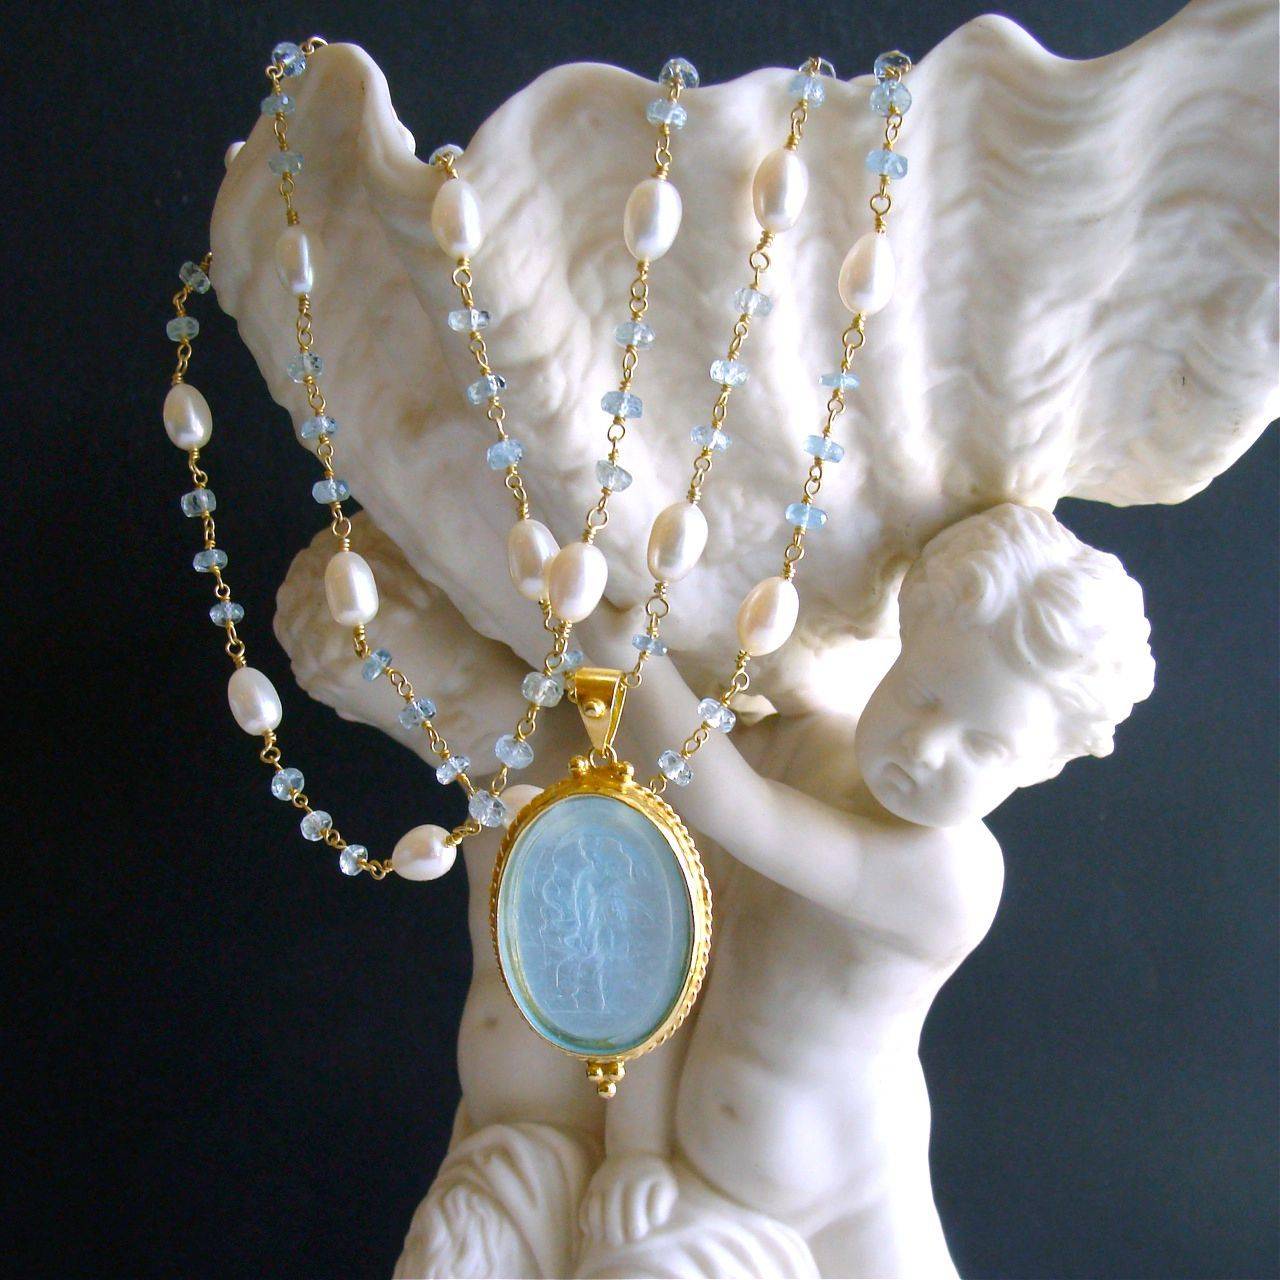 Matera Necklace.

A long delicate necklace of hand-linked frothy aquamarines and creamy freshwater pearls, is perfectly coordinated with the powdery aqua color of a Venetian glass intaglio cameo pendant.  The subject of the cameo intaglio is a